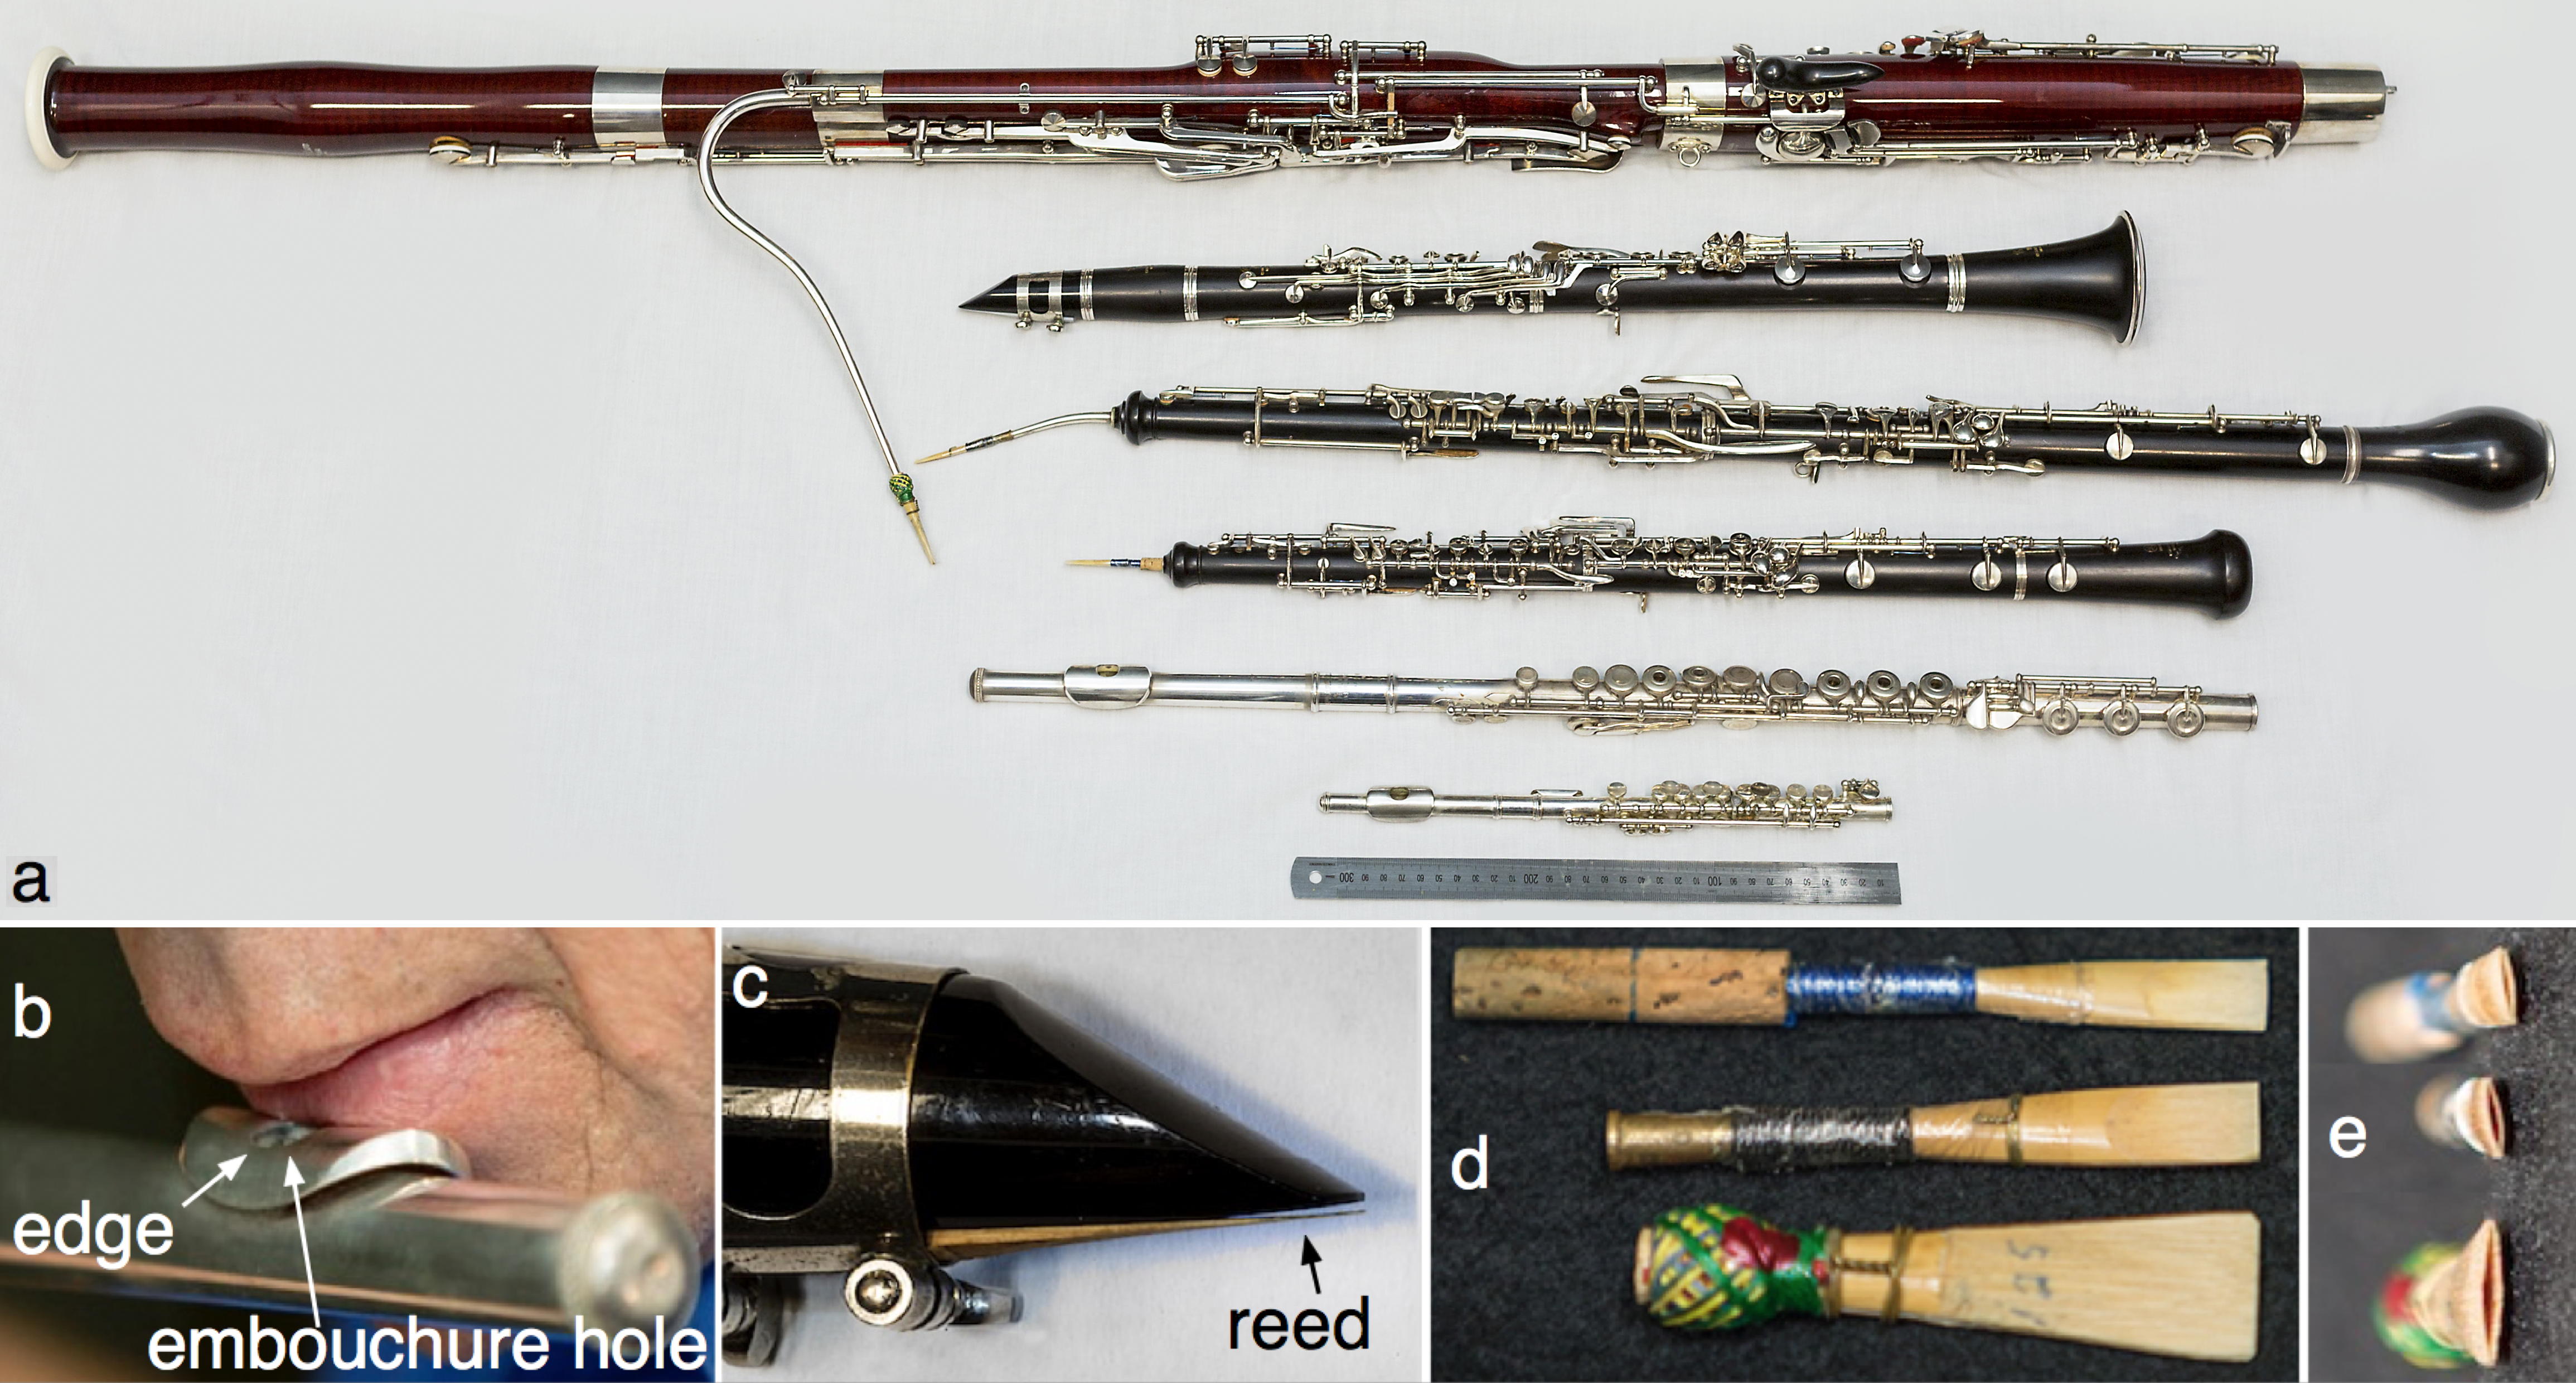 Double reed acoustics: oboe, bassoon and others